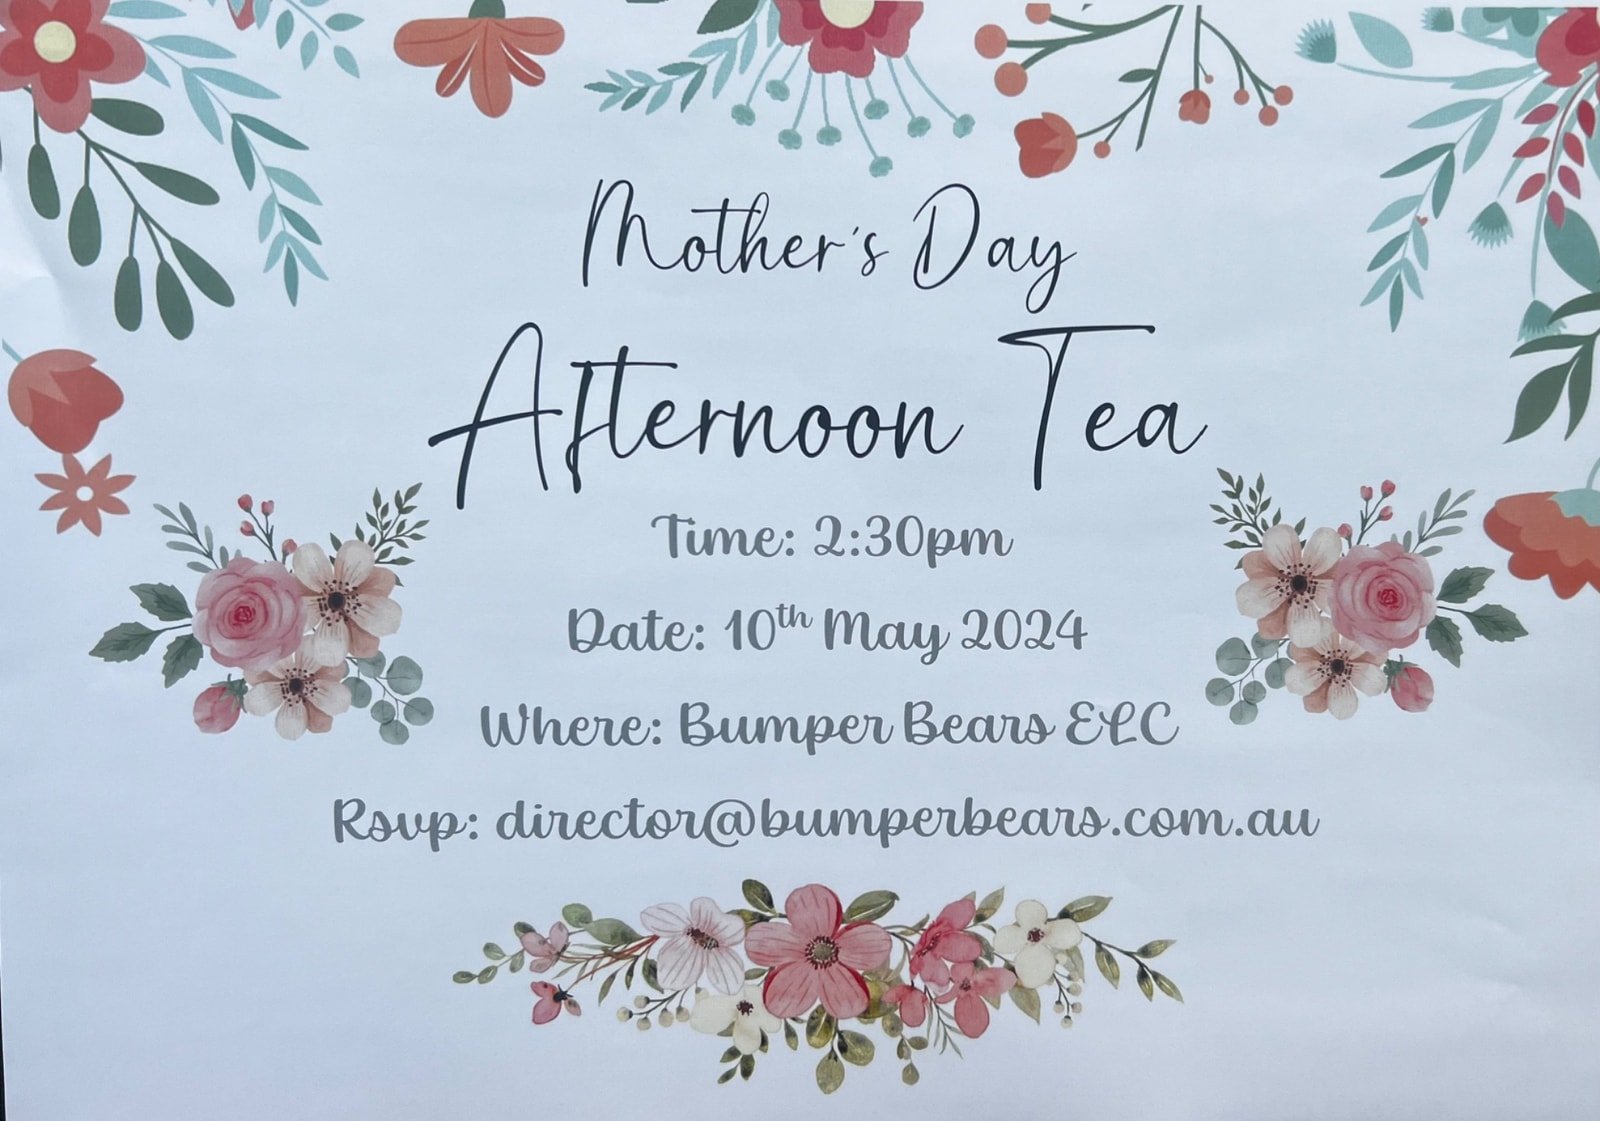 We are celebrating our beautiful mums with a Mother's Day Afternoon tea. Please let Nicky know if you can make it! #mothesday #mum #mother #stepmum #bonusmum #mummy #mothersdayafternoontea